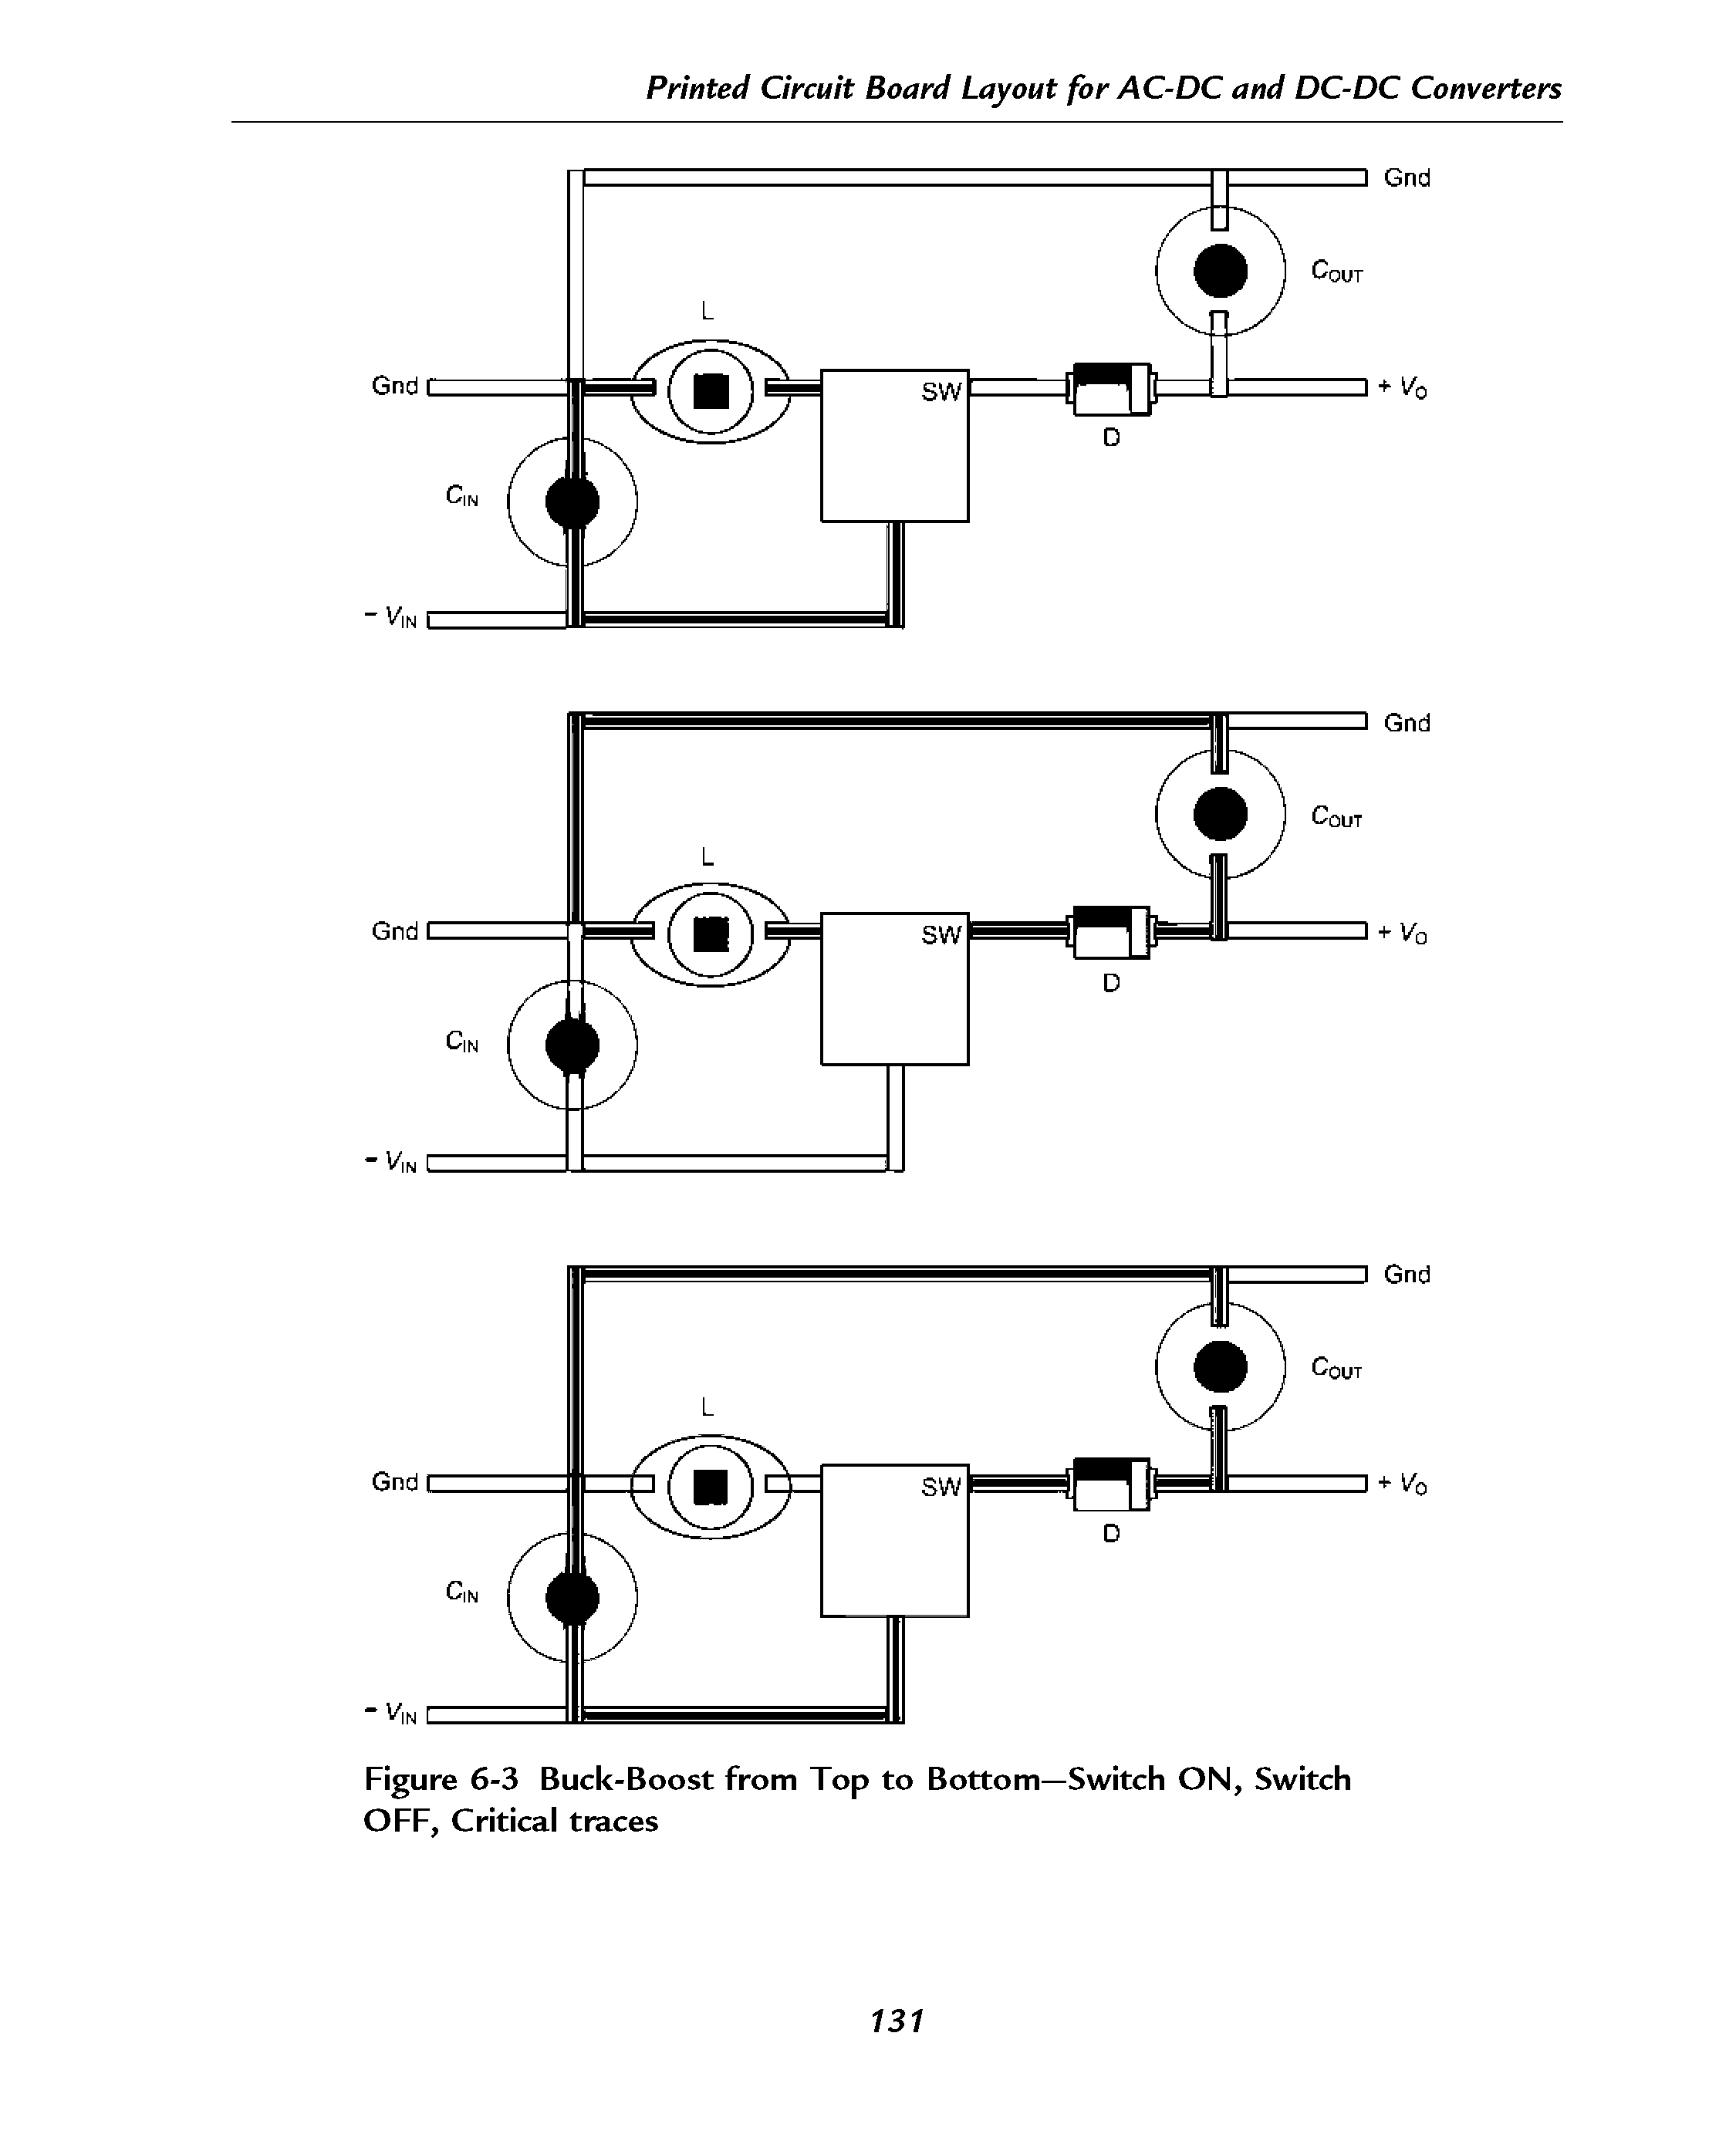 Figure 6-3 Buck-Boost from Top to Bottom—Switch ON, Switch OFF, Critical traces...